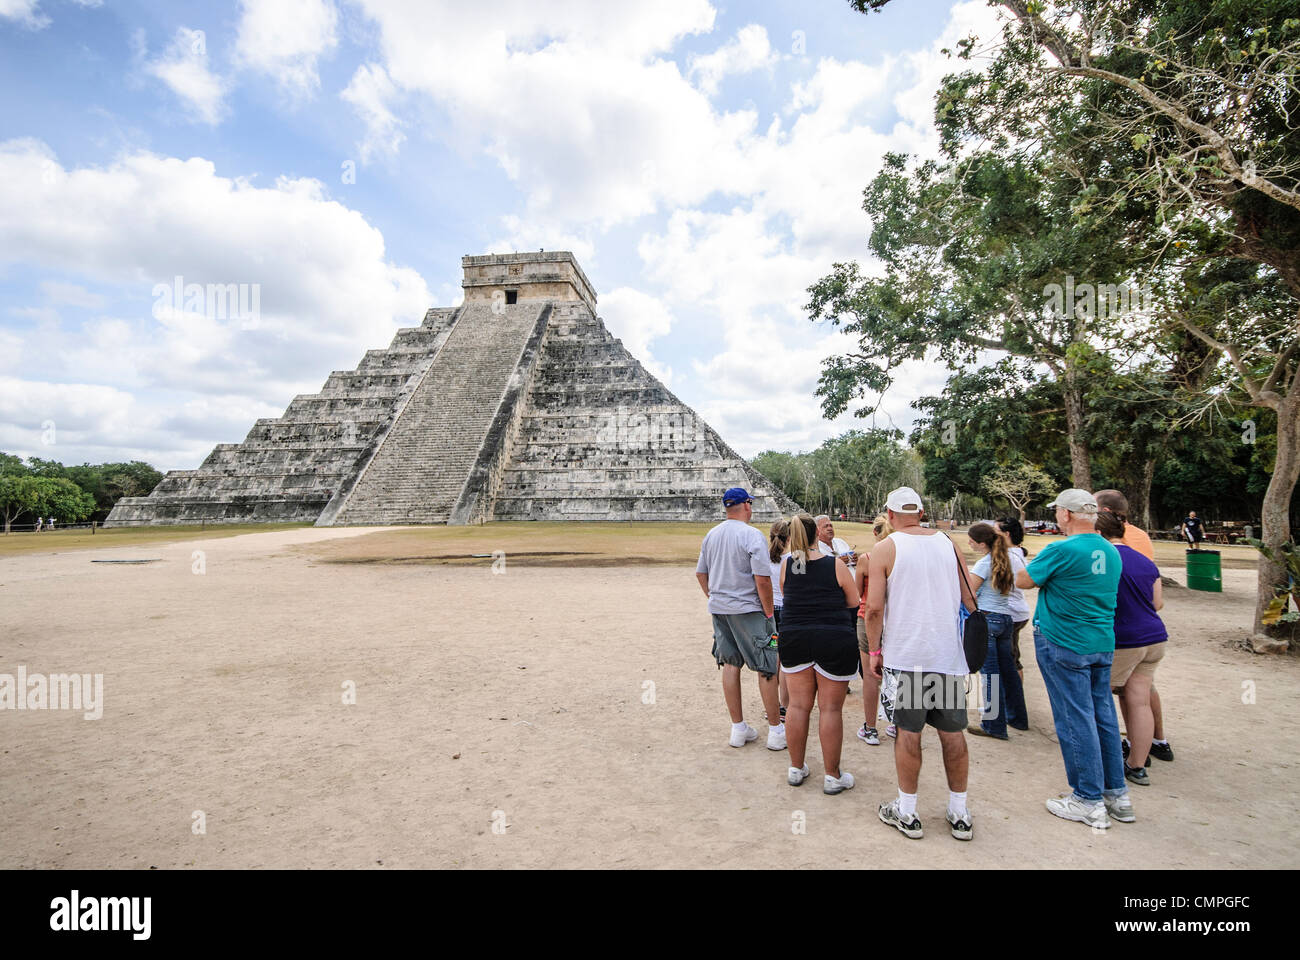 CHICHEN ITZA, Mexico - Temple of Kukulkan (El Castillo) at Chichen Itza Archeological Zone, ruins of a major Maya civilization city in the heart of Mexico's Yucatan Peninsula. A group of tourists stands to the right of frame. Stock Photo